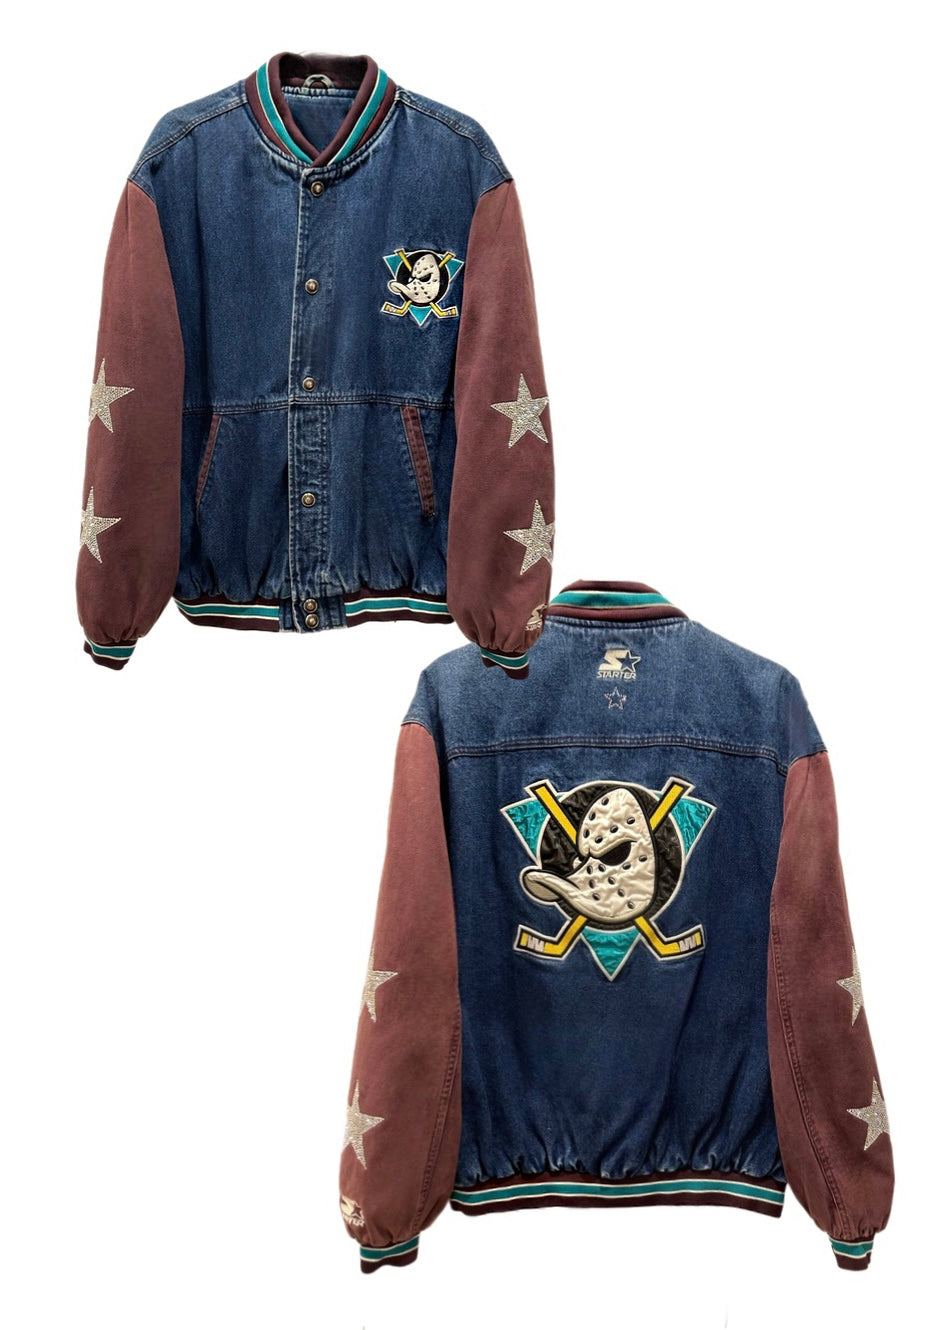 Anaheim Ducks, Mighty Duck Hockey, “Rare Find” One of a Kind Vintage Jacket with Crystal Star Design